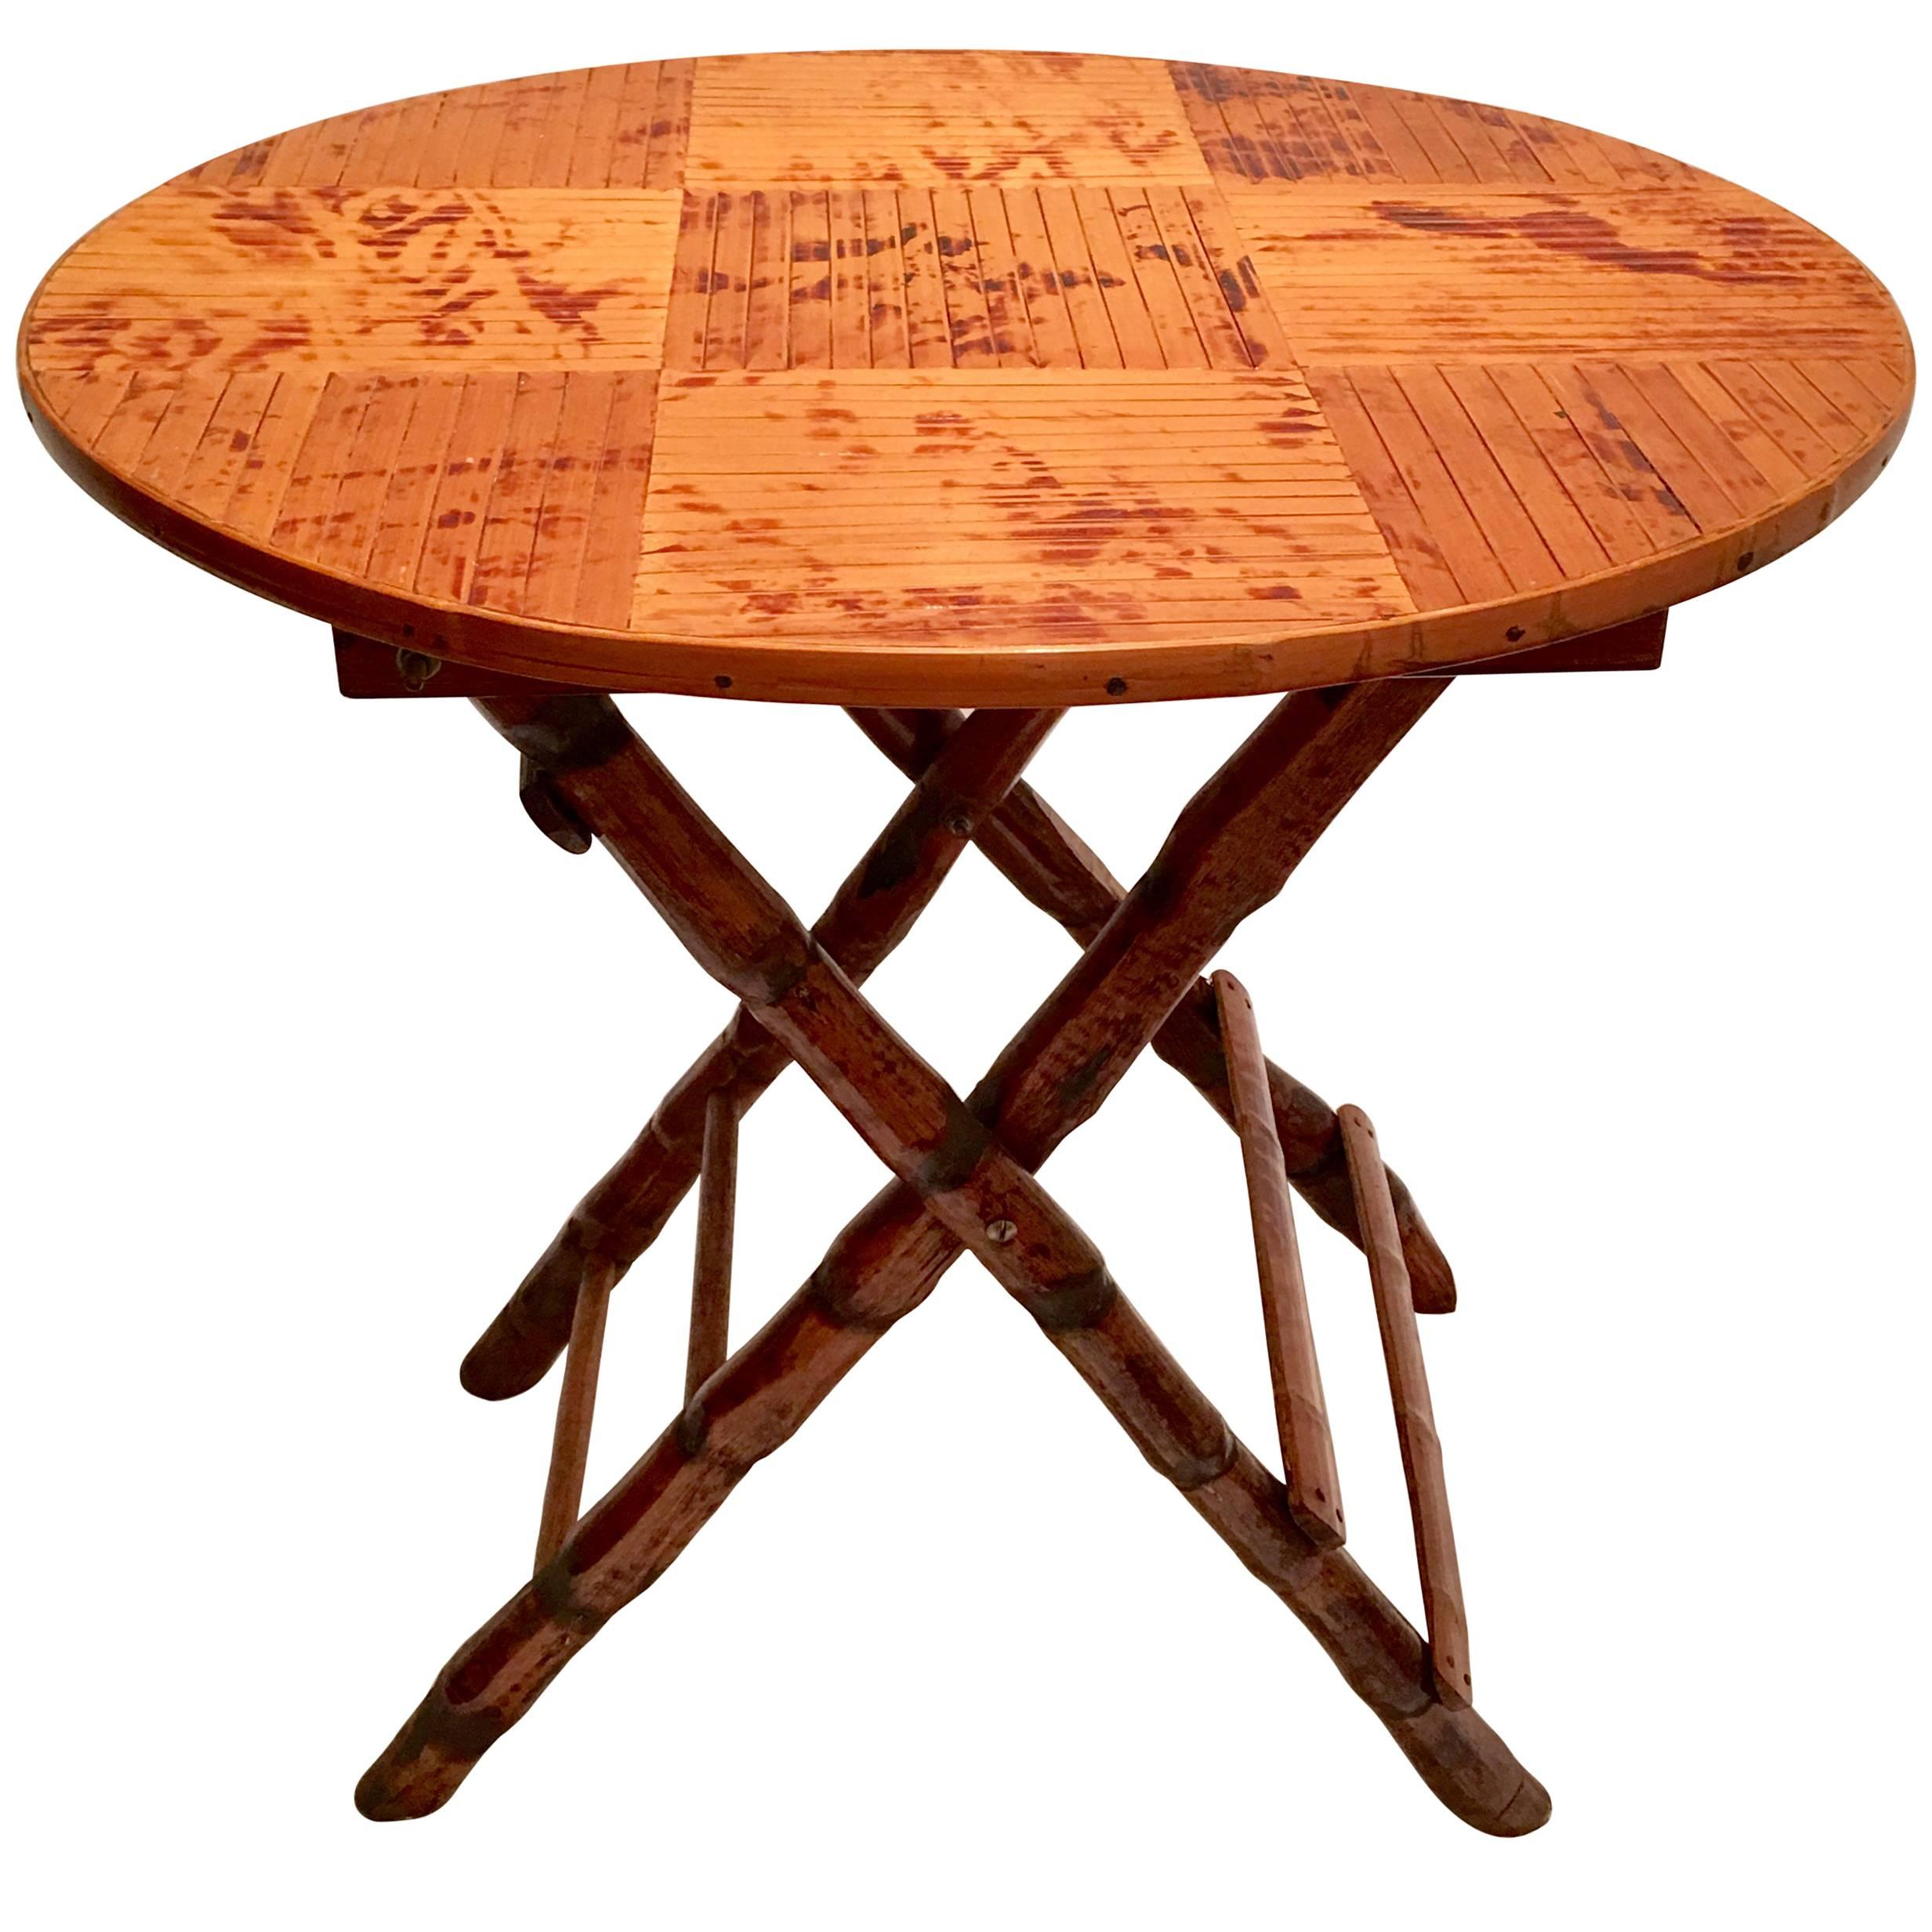 1950'SsCampaign Style Rattan Folding Table